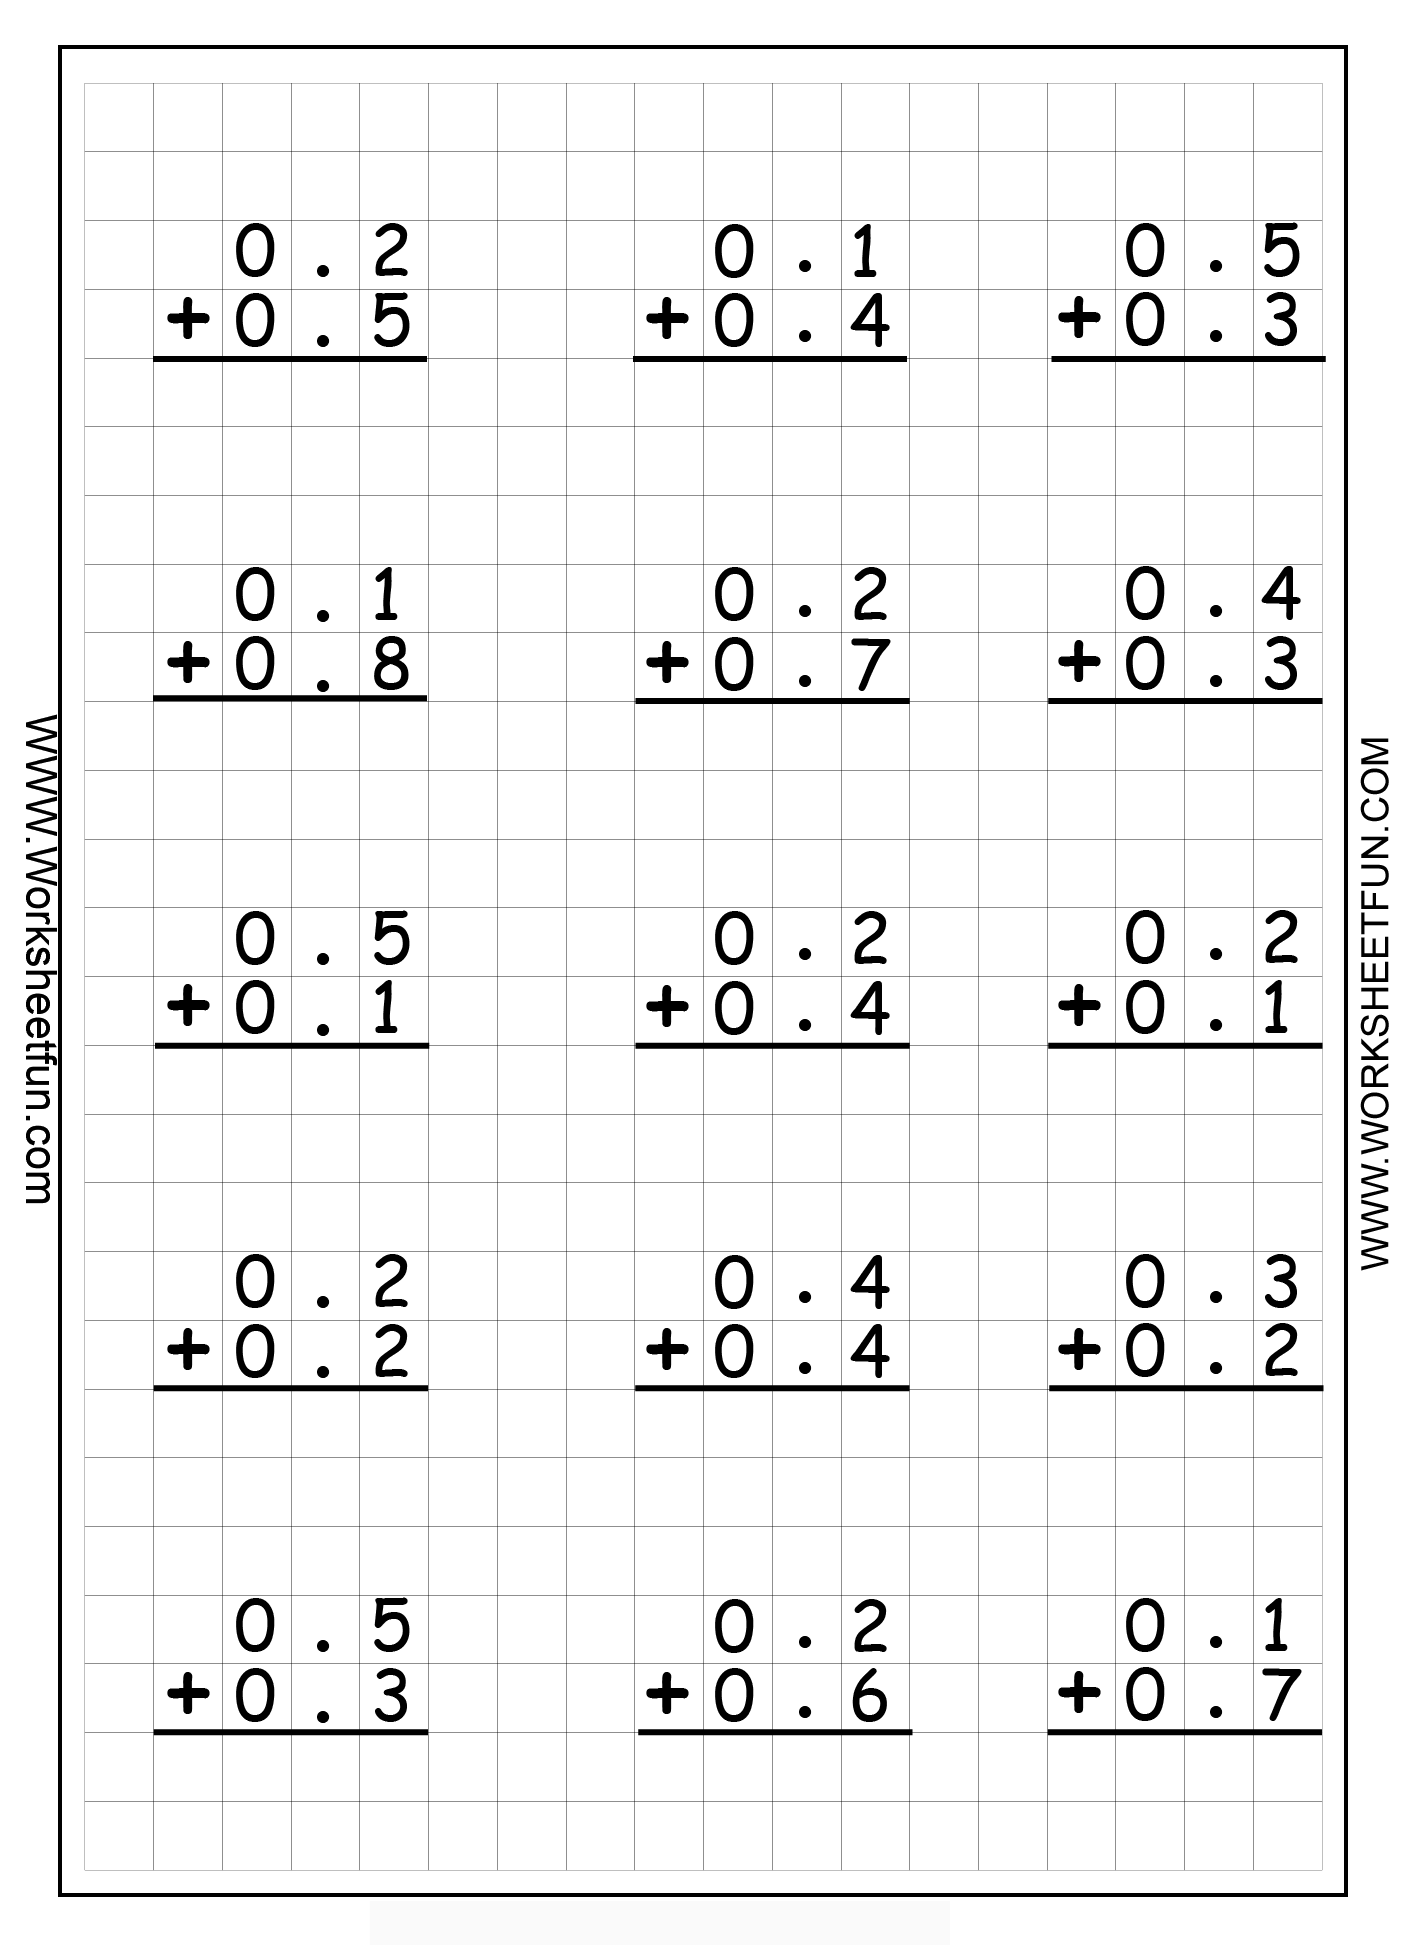 8 Best Images of Comparing Shapes Worksheet - Comparing Fractions